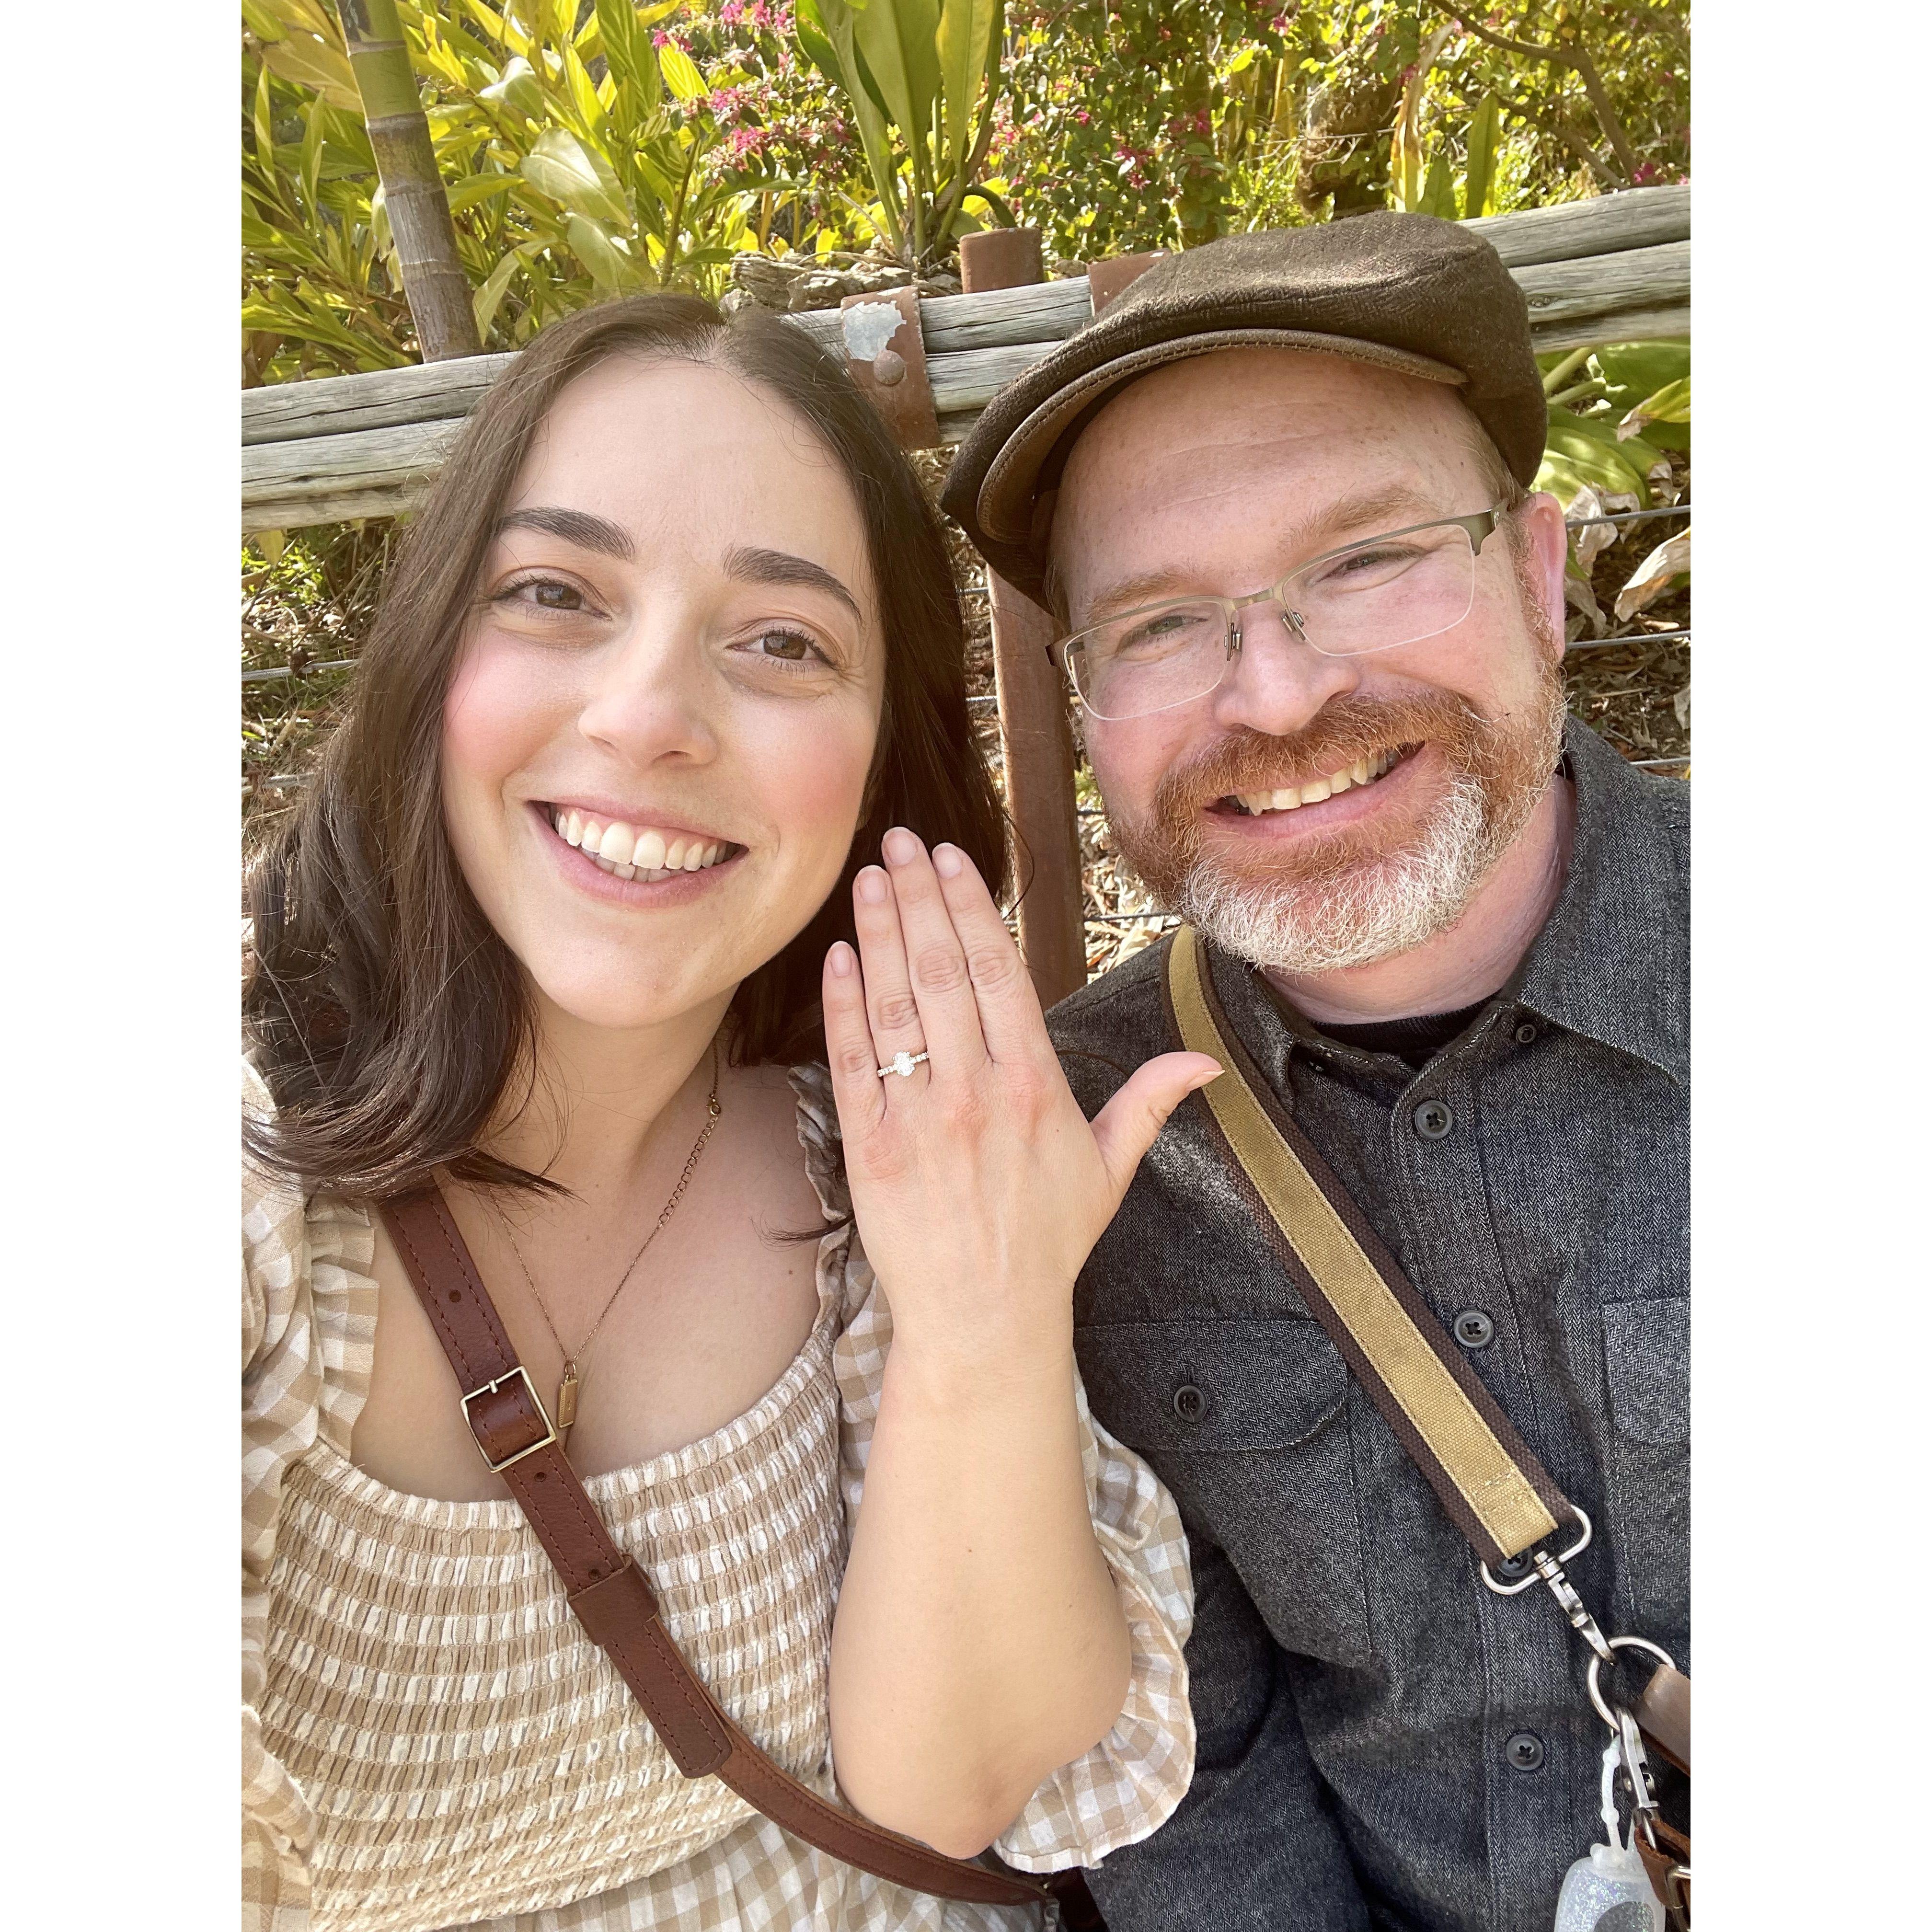 Right after he proposed at the San Diego Zoo Safari Park on Danielle's favorite trail, the Arbor Walk.